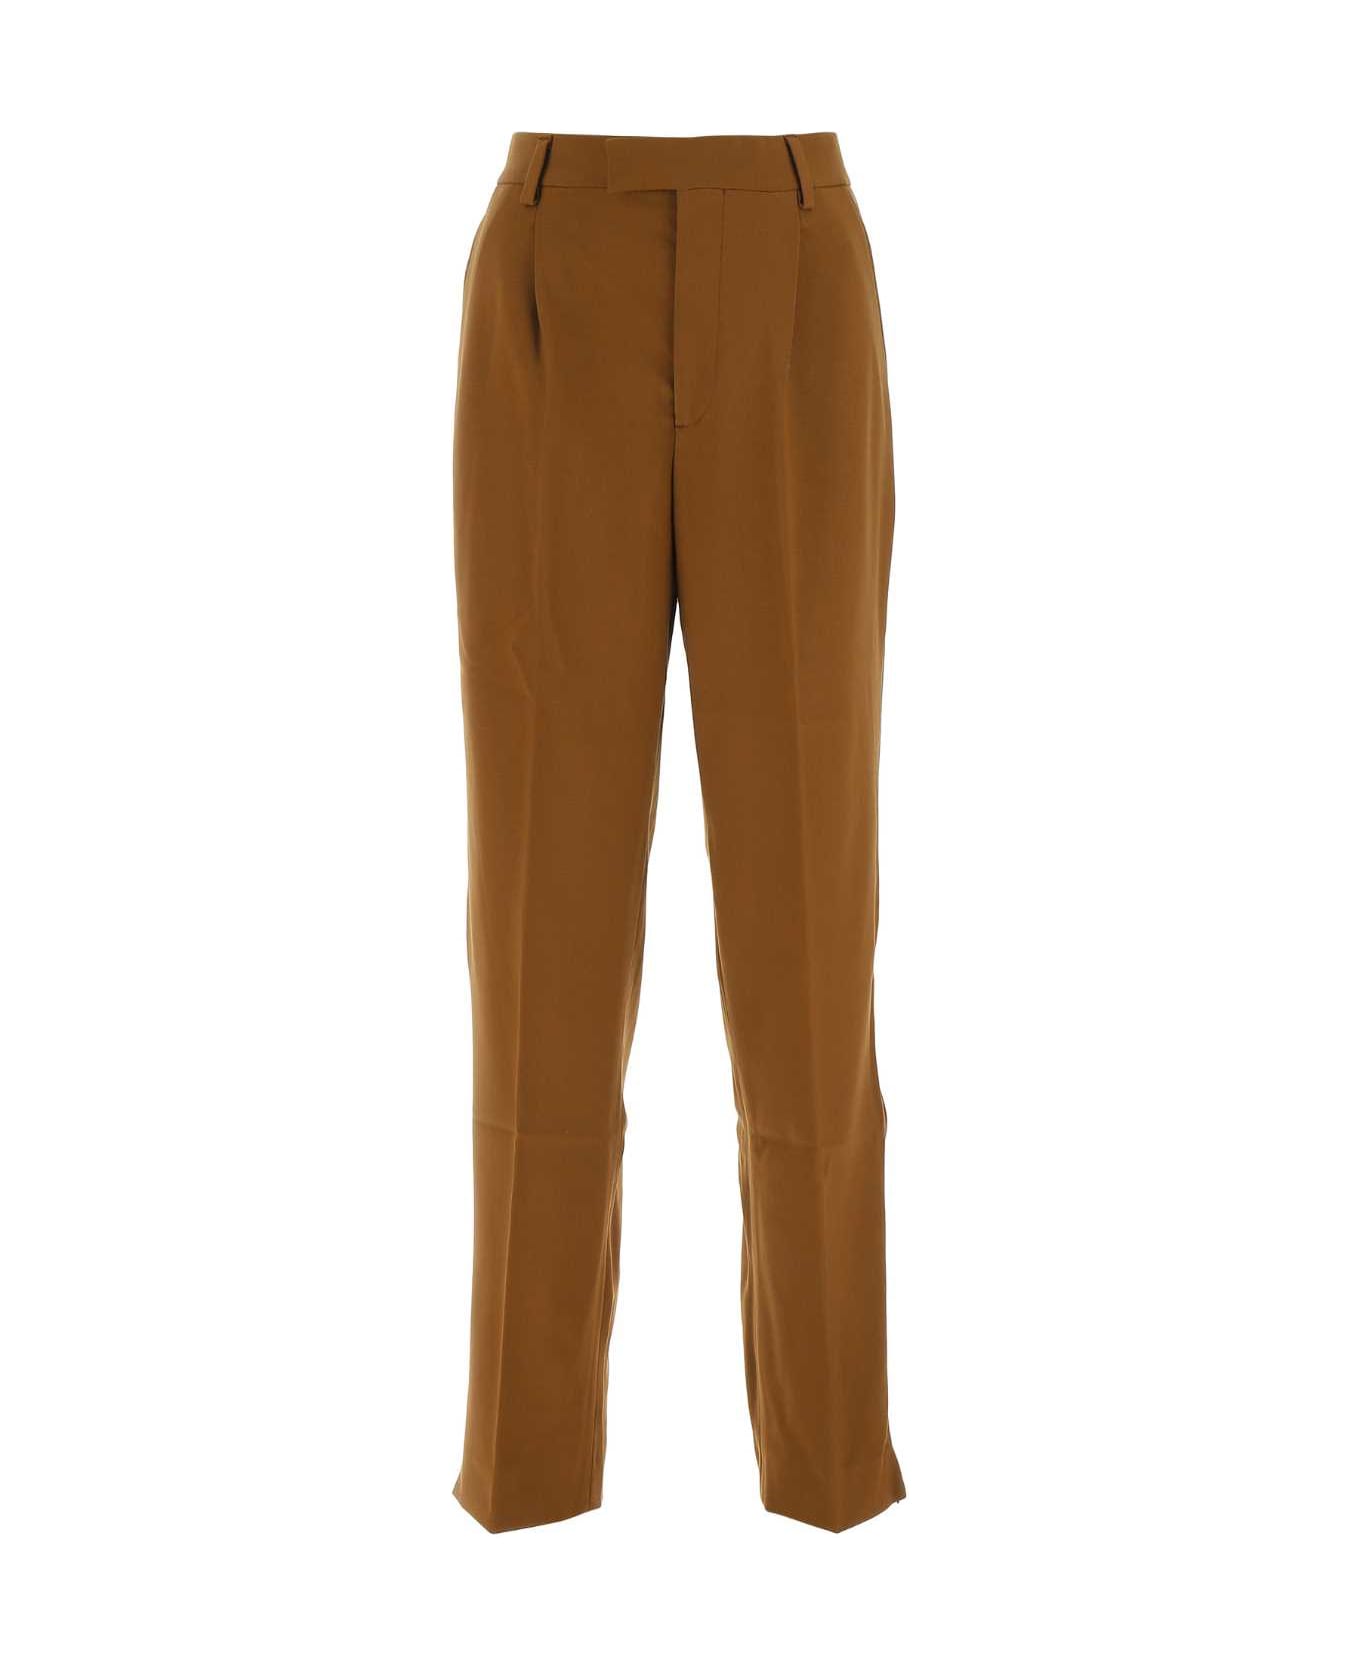 VTMNTS Brown Stretch Wool Pant - BROWN ボトムス